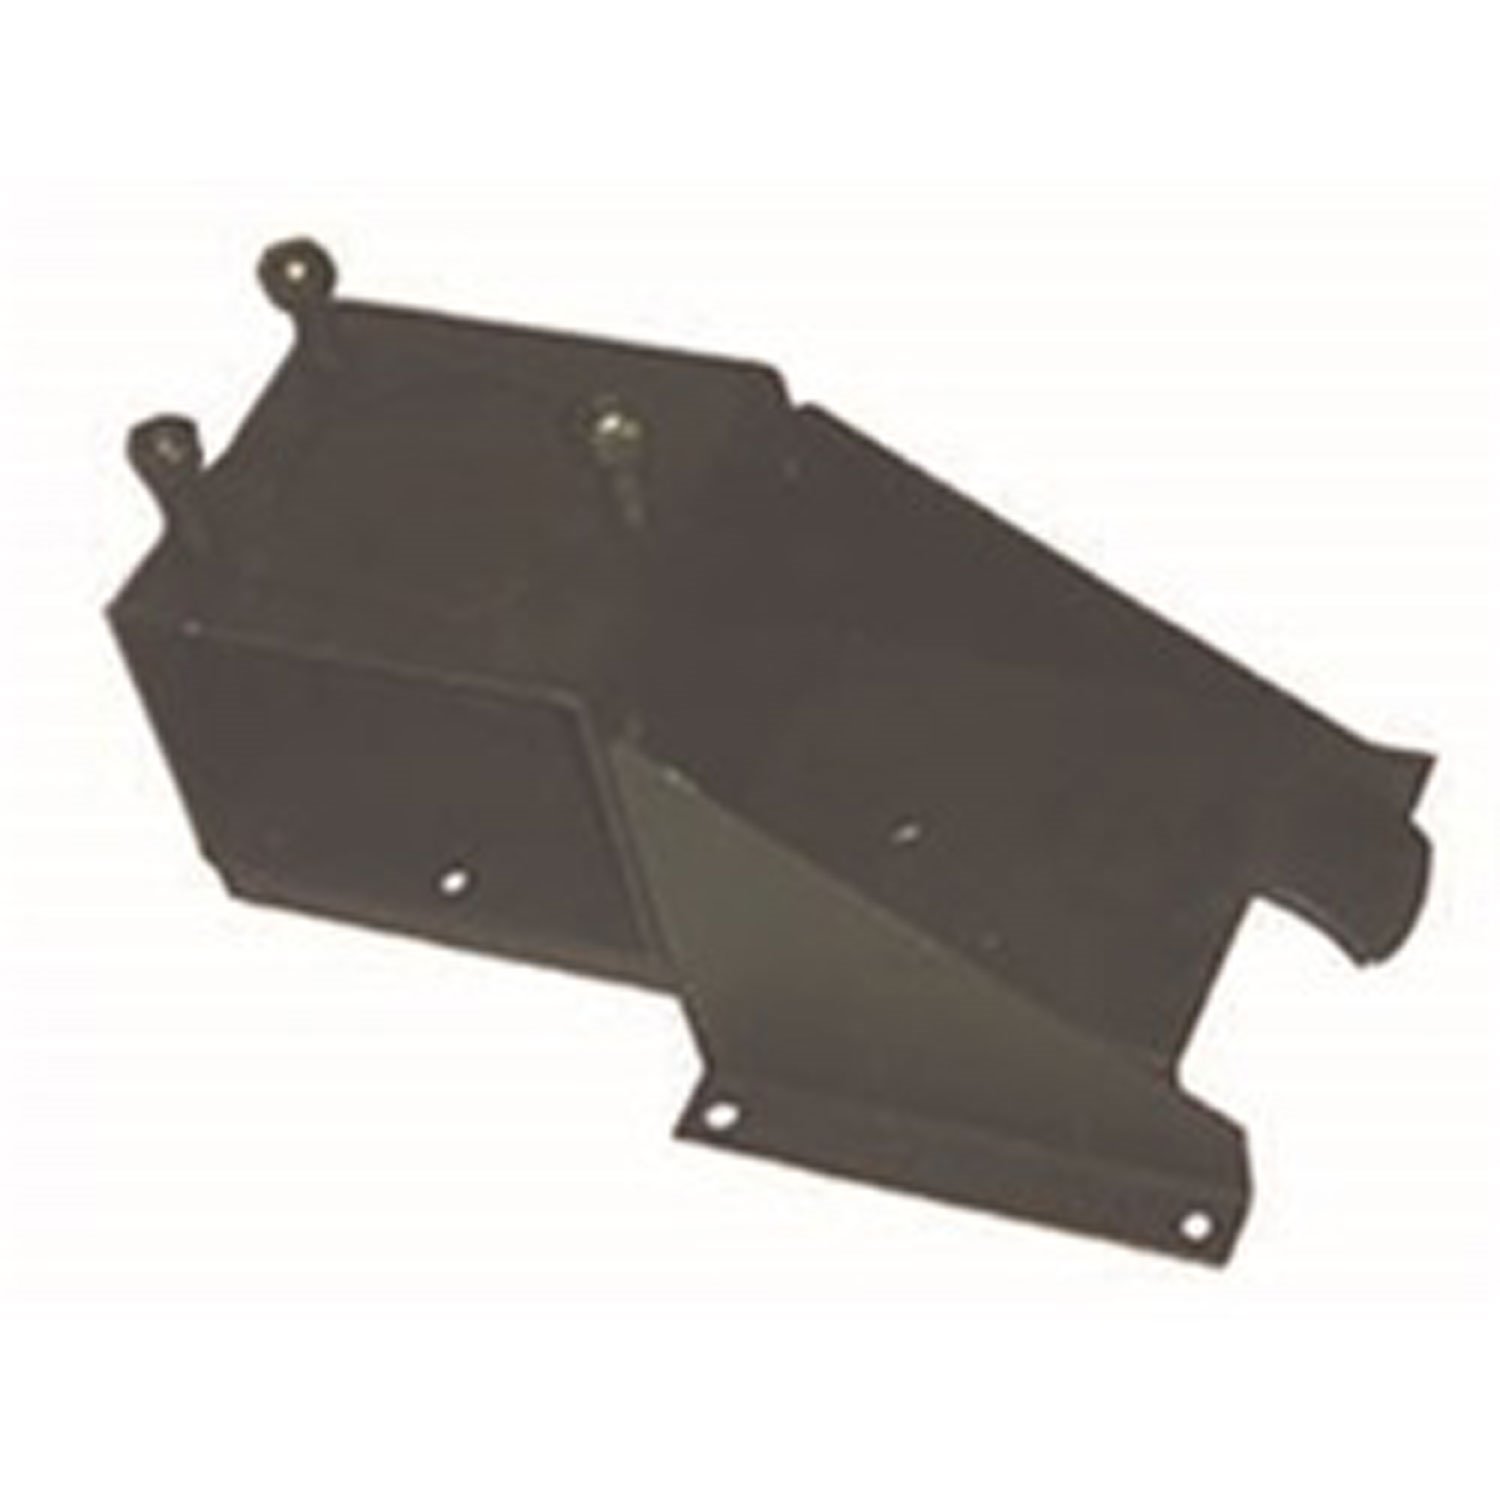 This reproduction spare tire carrier from Omix-ADA fits